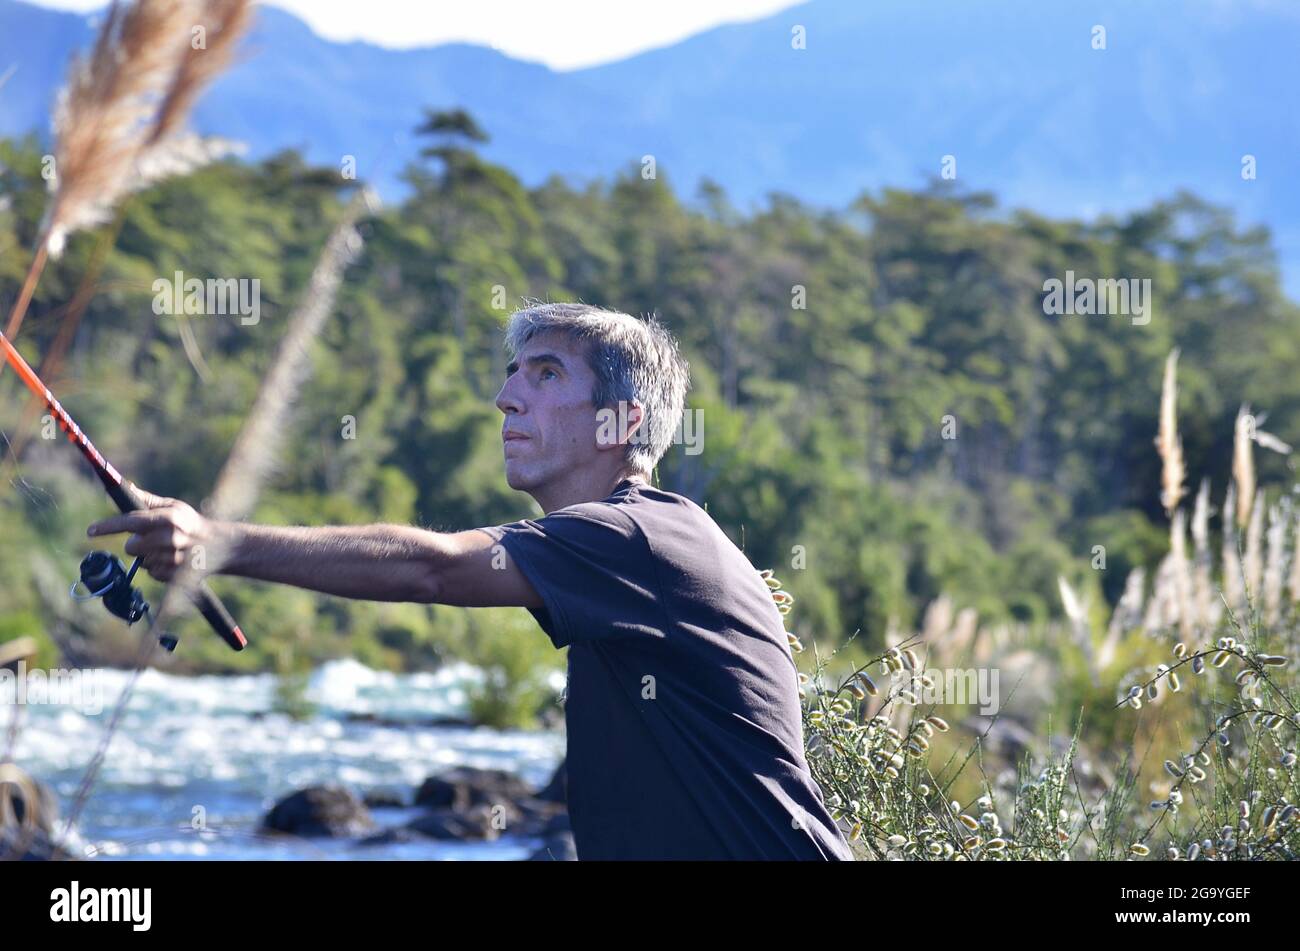 Man standing by a river fishing, Argentina Stock Photo